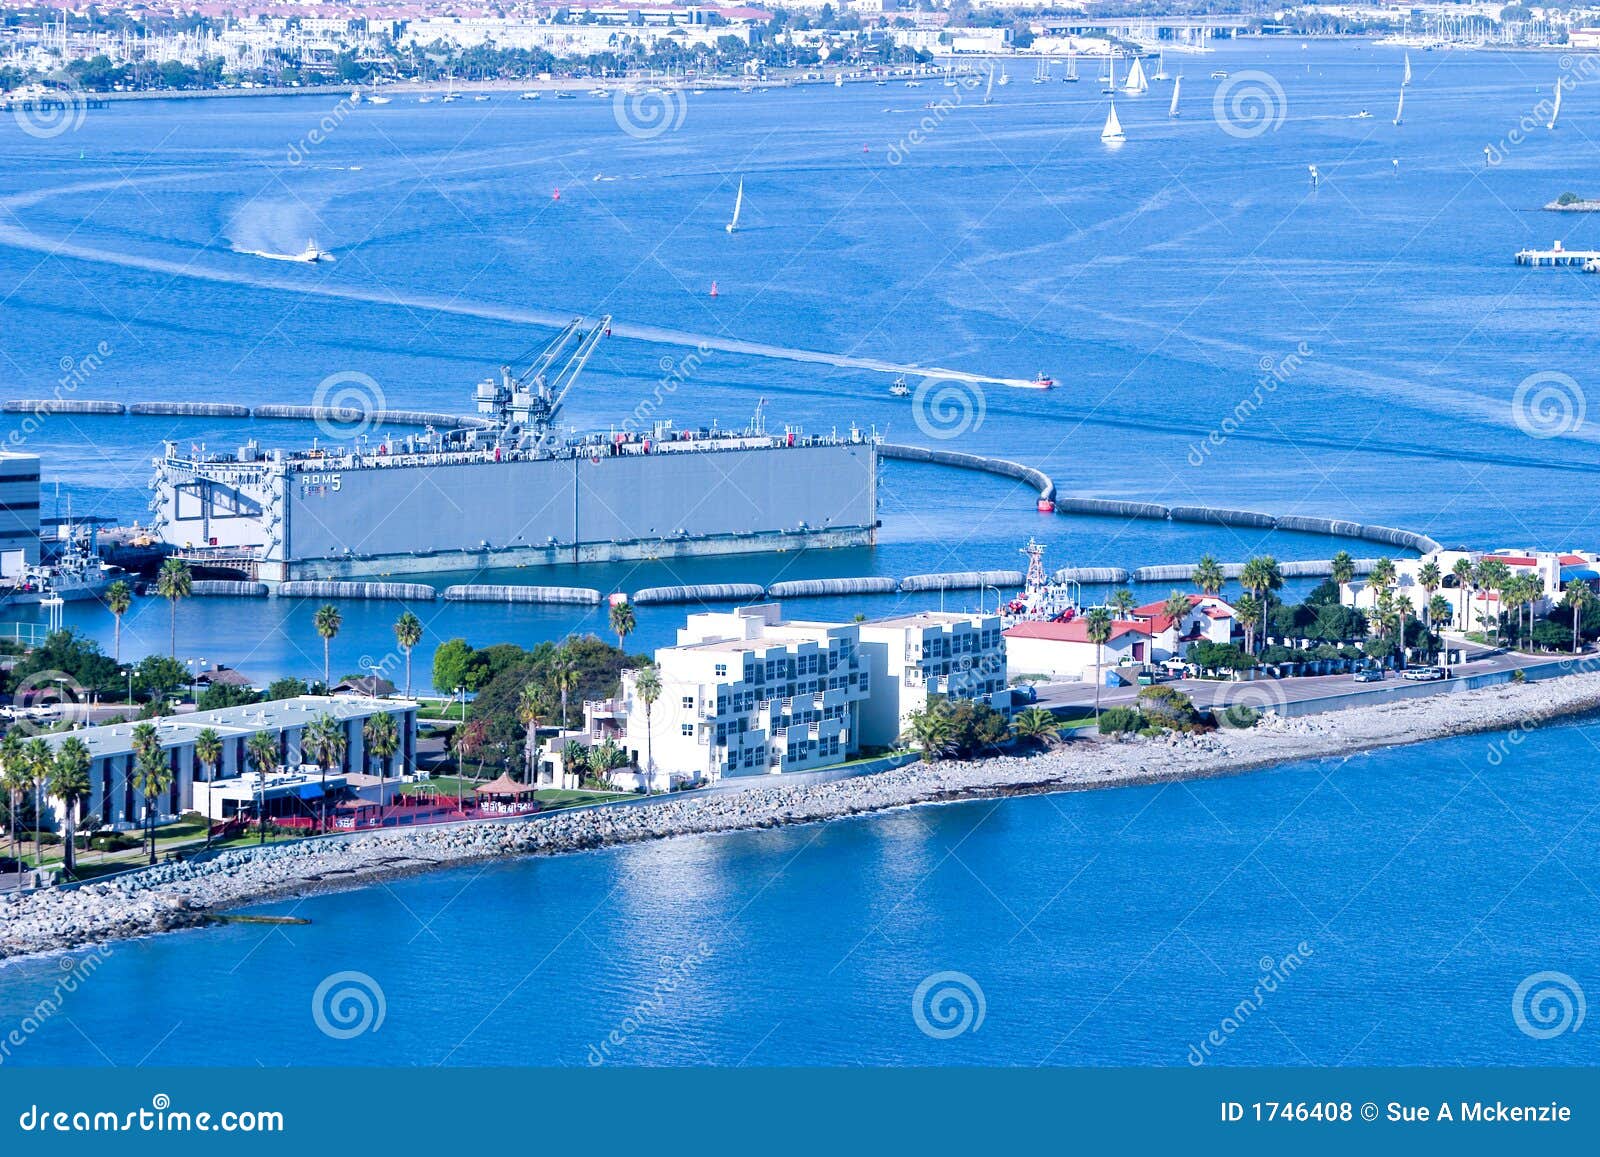 Floating Dry Dock In Harbor Royalty Free Stock Photos - Image: 1746408